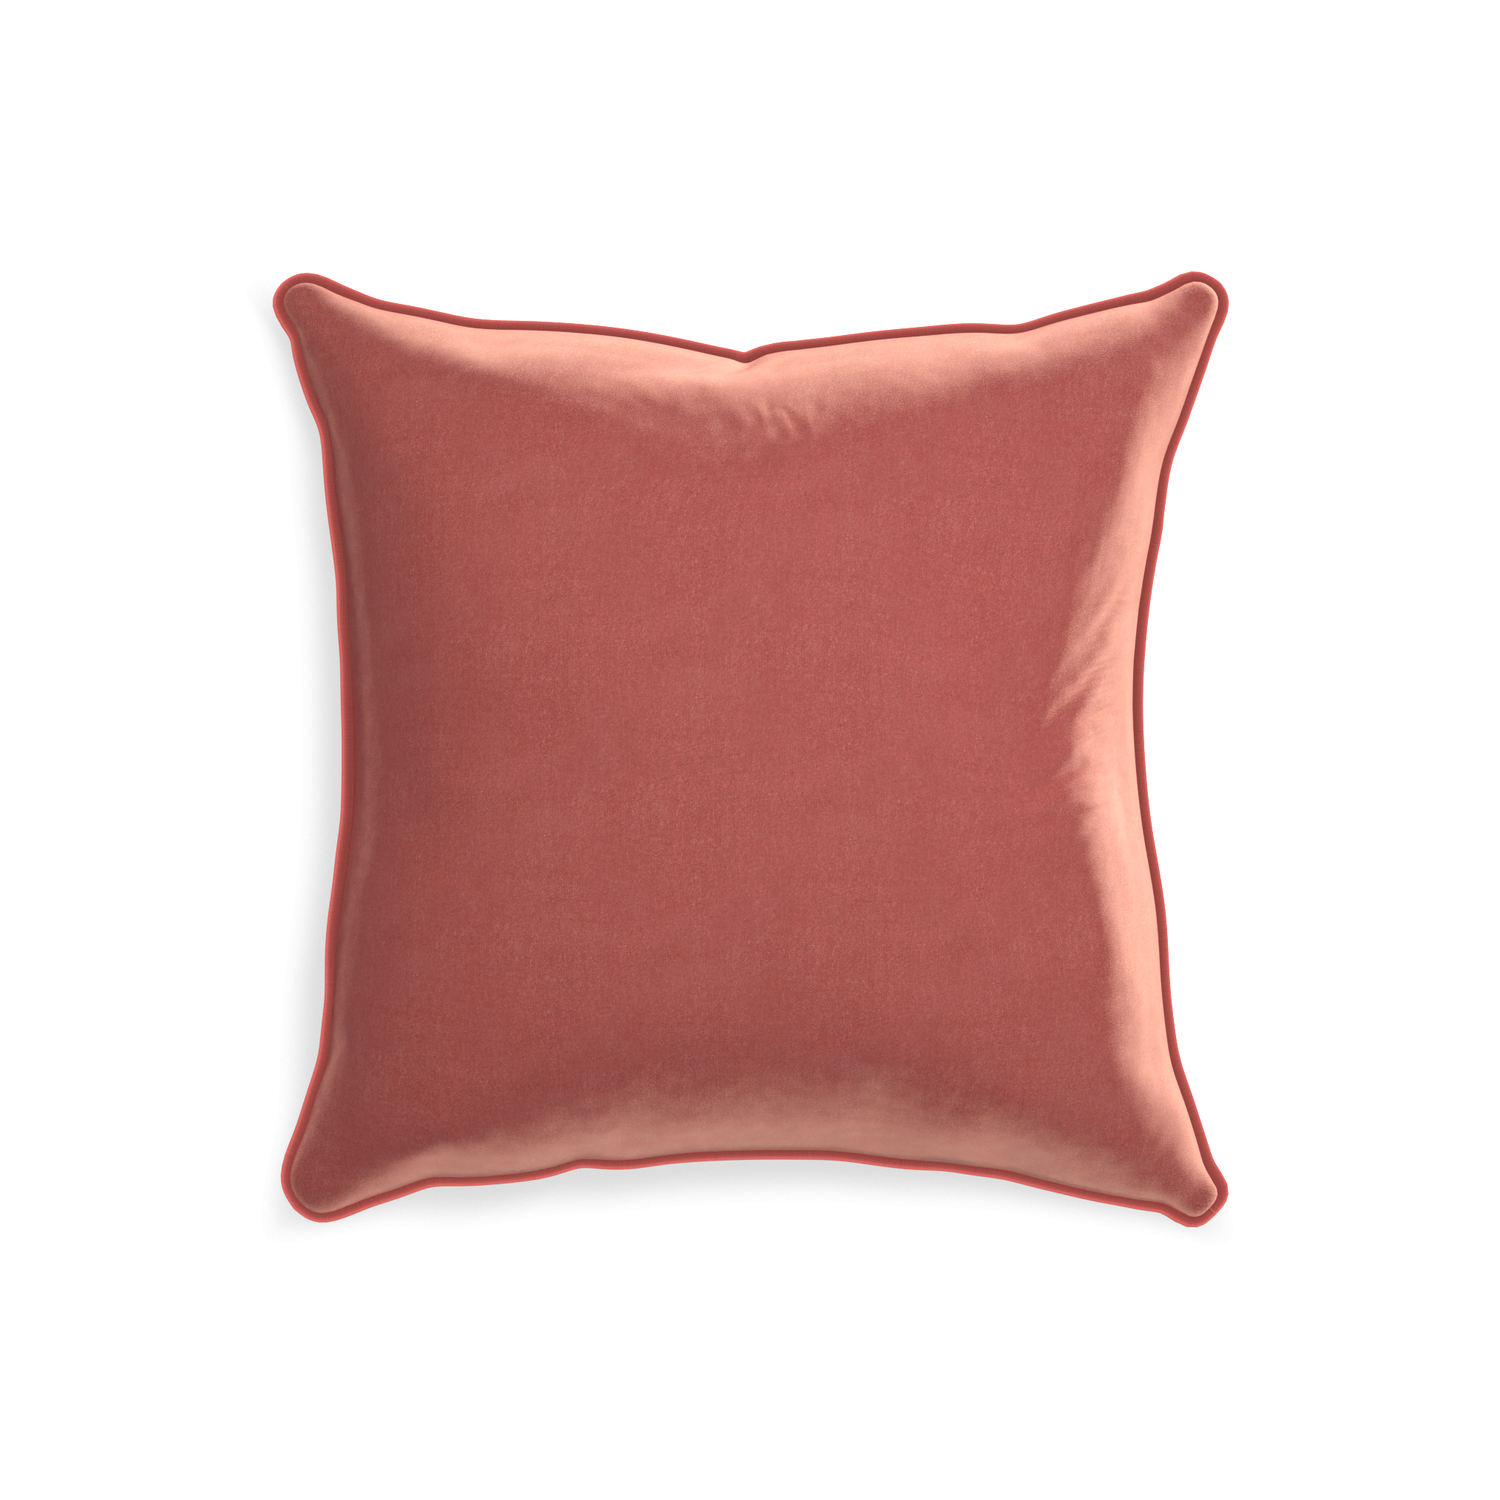 20-square cosmo velvet custom coralpillow with c piping on white background